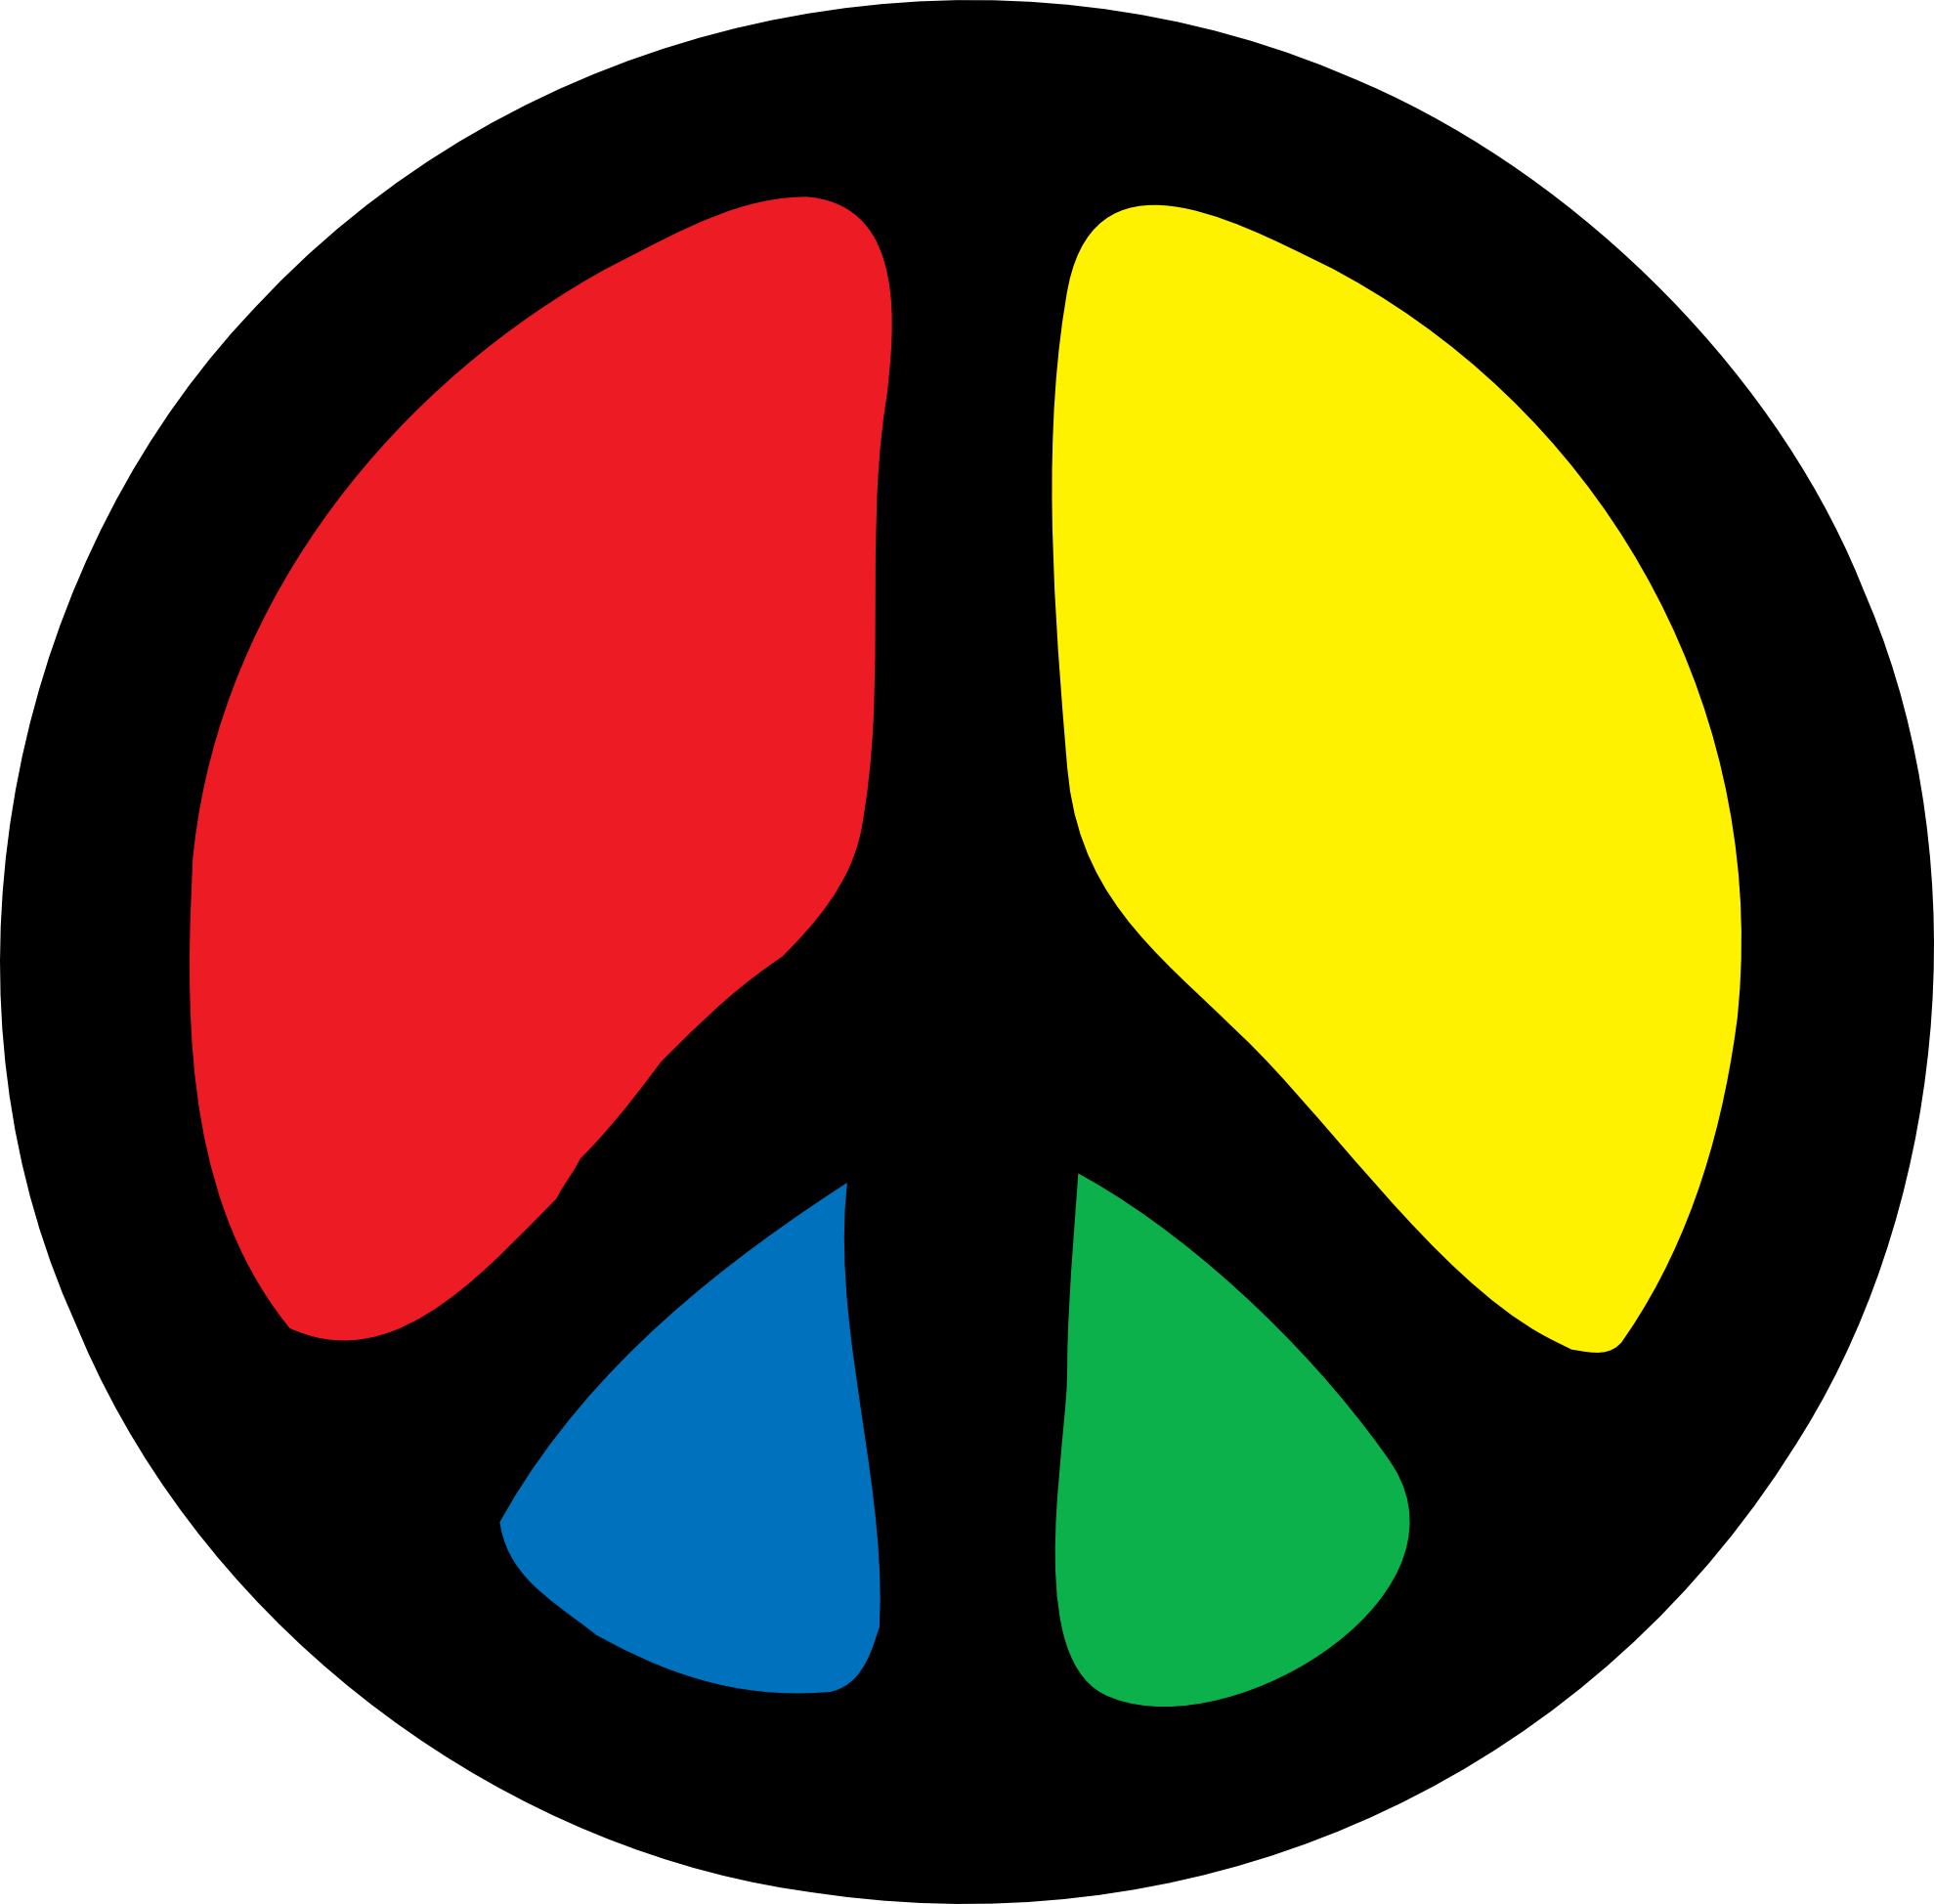 Peace Sign Logo - Peace symbol PNG images free download